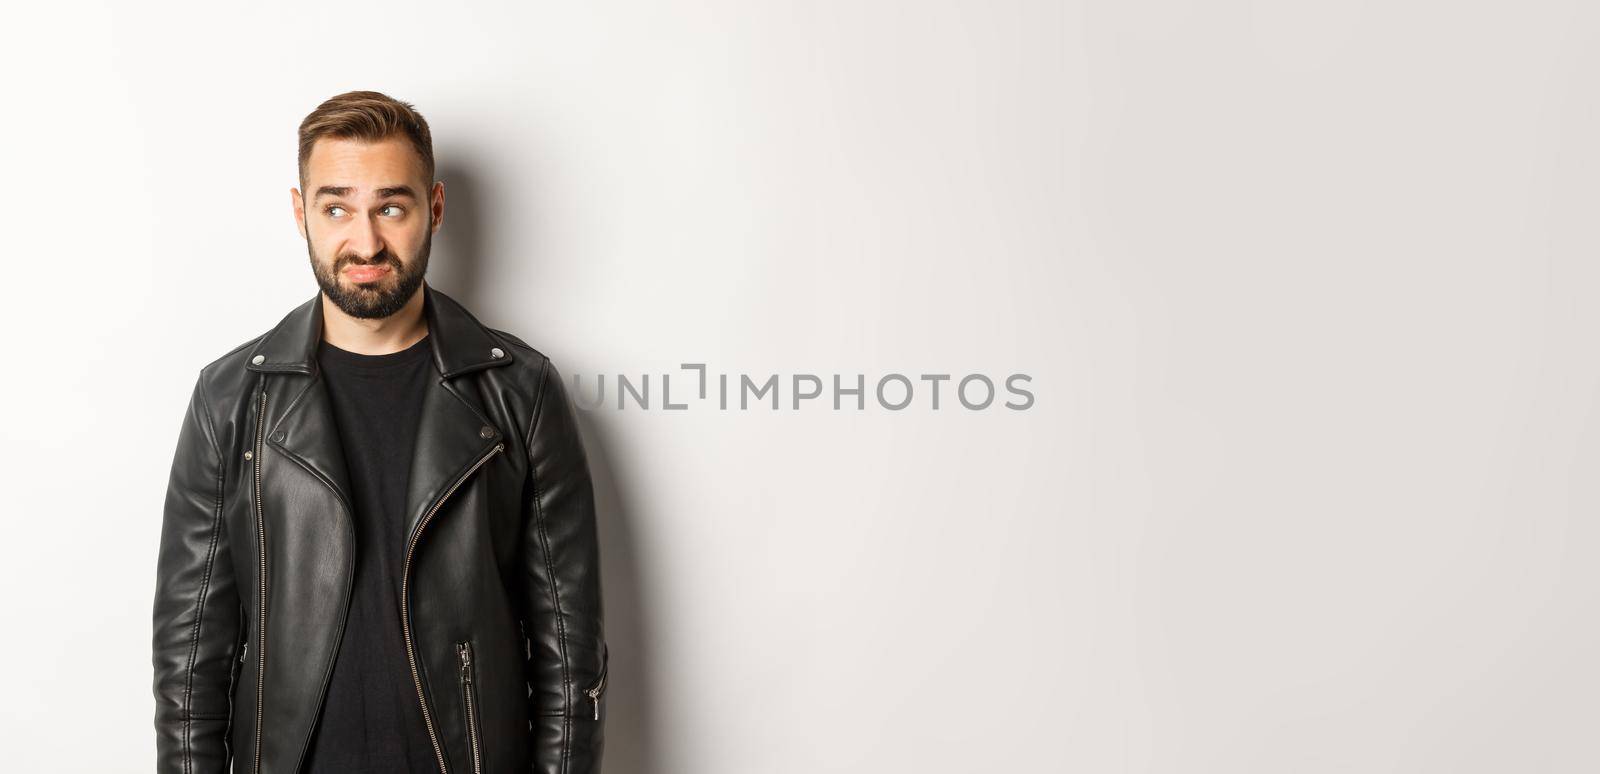 Indecisive gloomy man in black leather jacket, looking left and feeling uncomfortable, standing against white background.